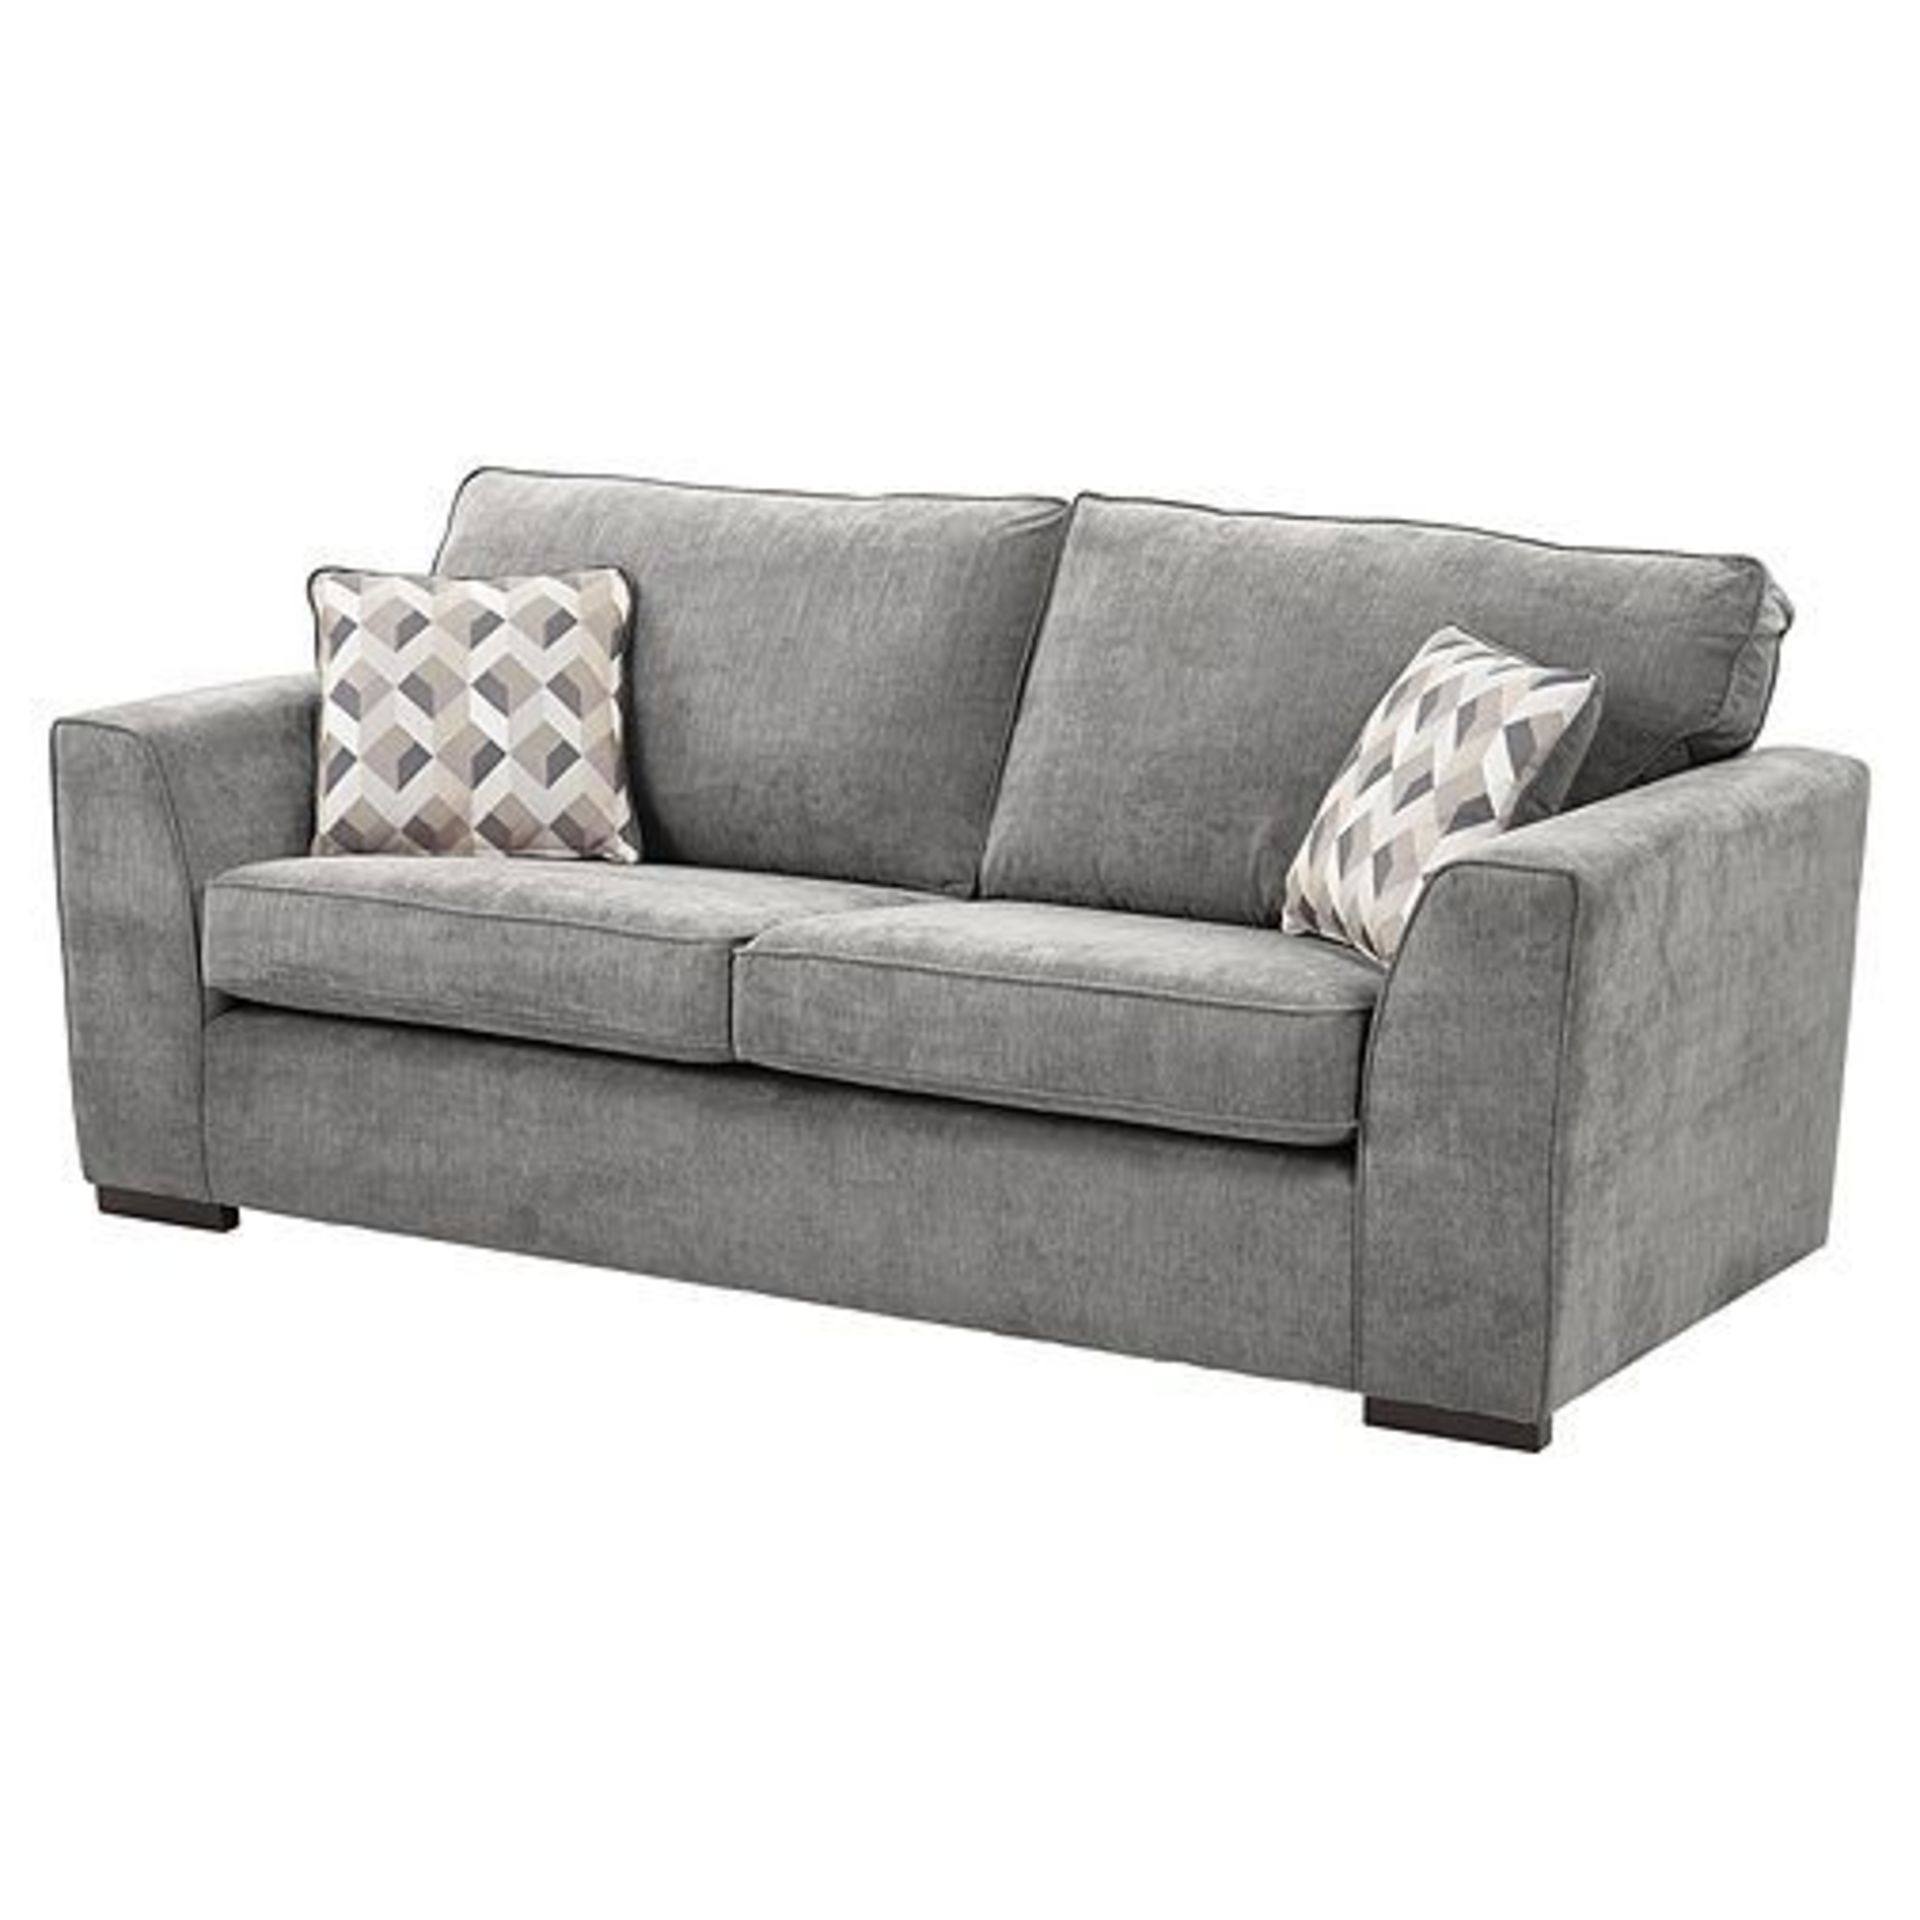 1 BRAND NEW BAGGED BOSTON LARGE 3 SEATER SOFA IN DARK GREY / CTS07907 (VIEWING HIGHLY RECOMMENDED)